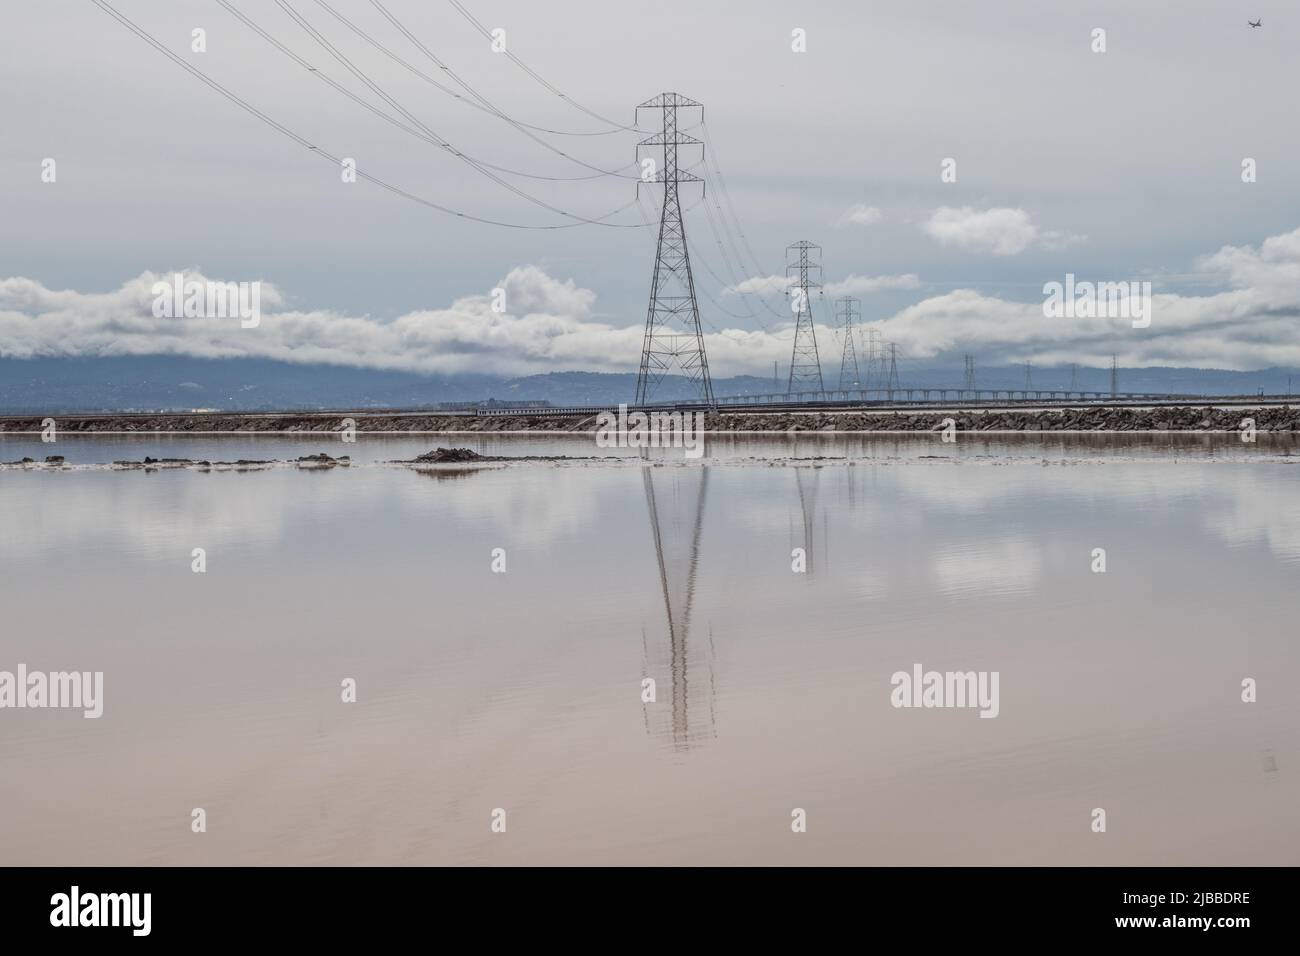 Powerlines stretch over the glass mirrorlike water of salt production ponds Stock Photo